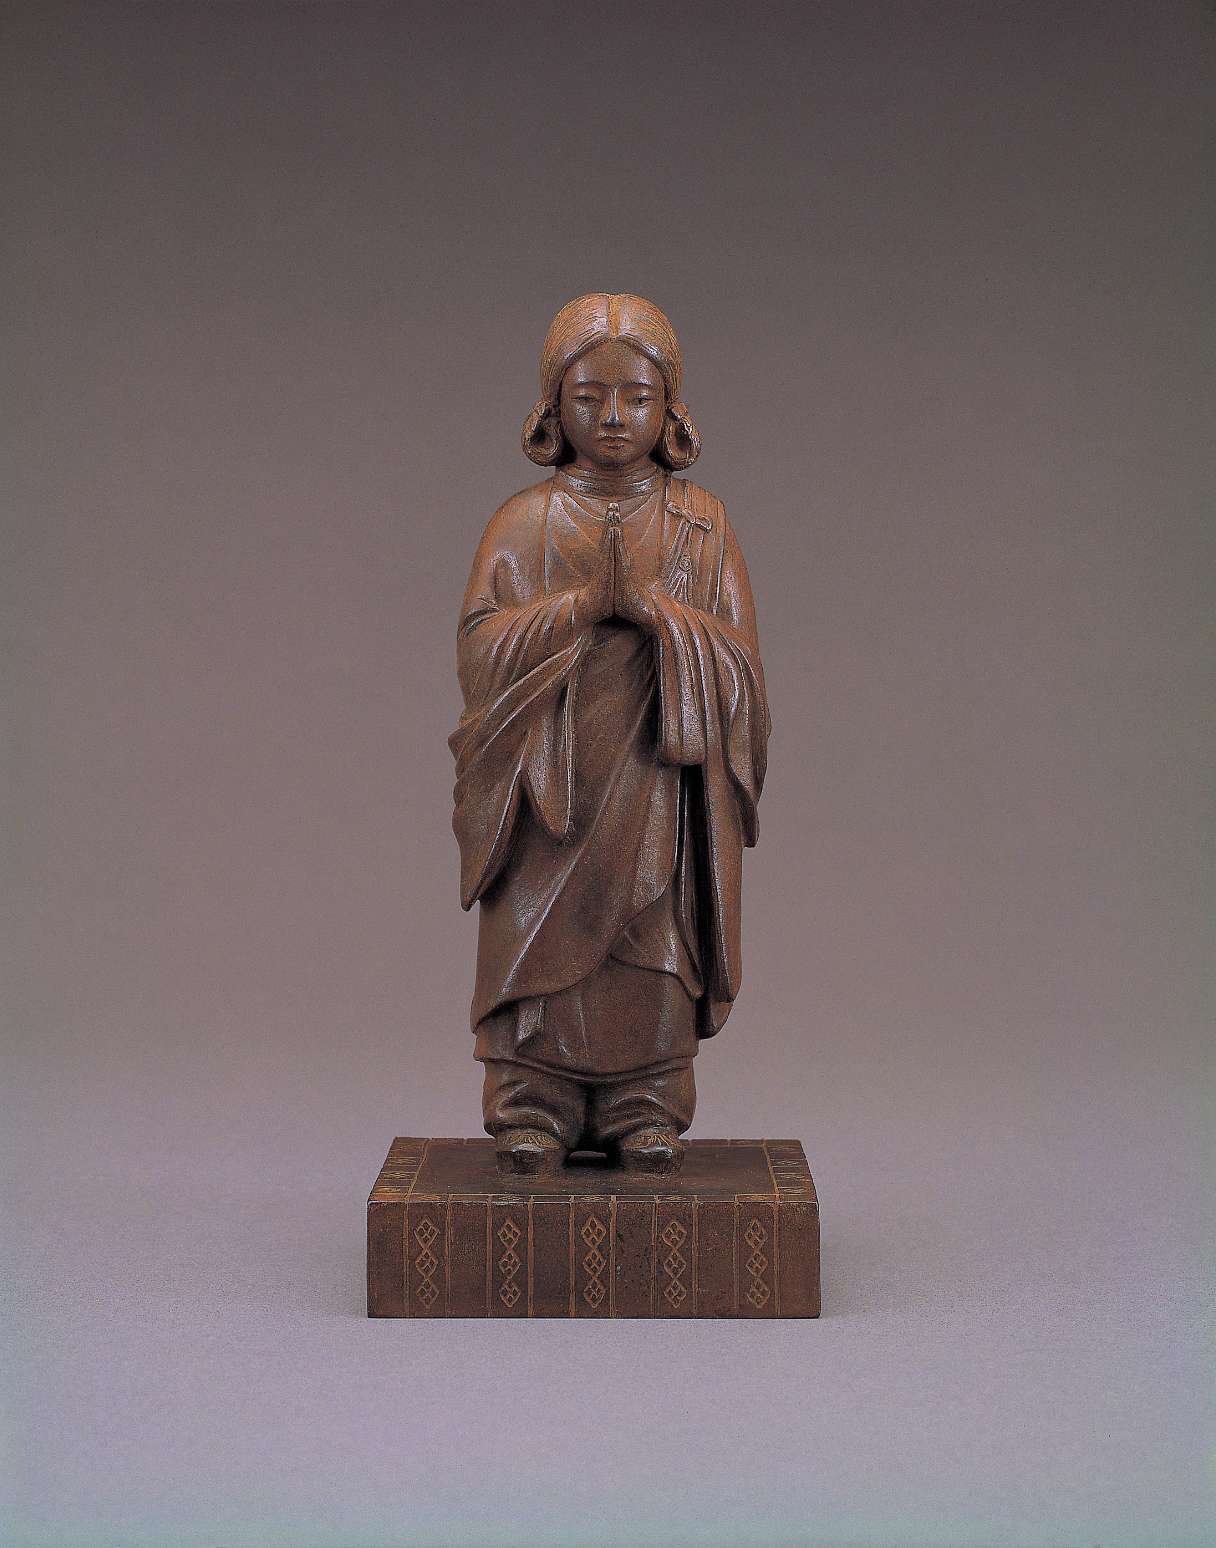 A matte brown statue of a long-haired young child, wearing flowing, oversized robes that accentuate his diminutive stature, stands with palms pressed together at his heart atop a decorated pedestal.